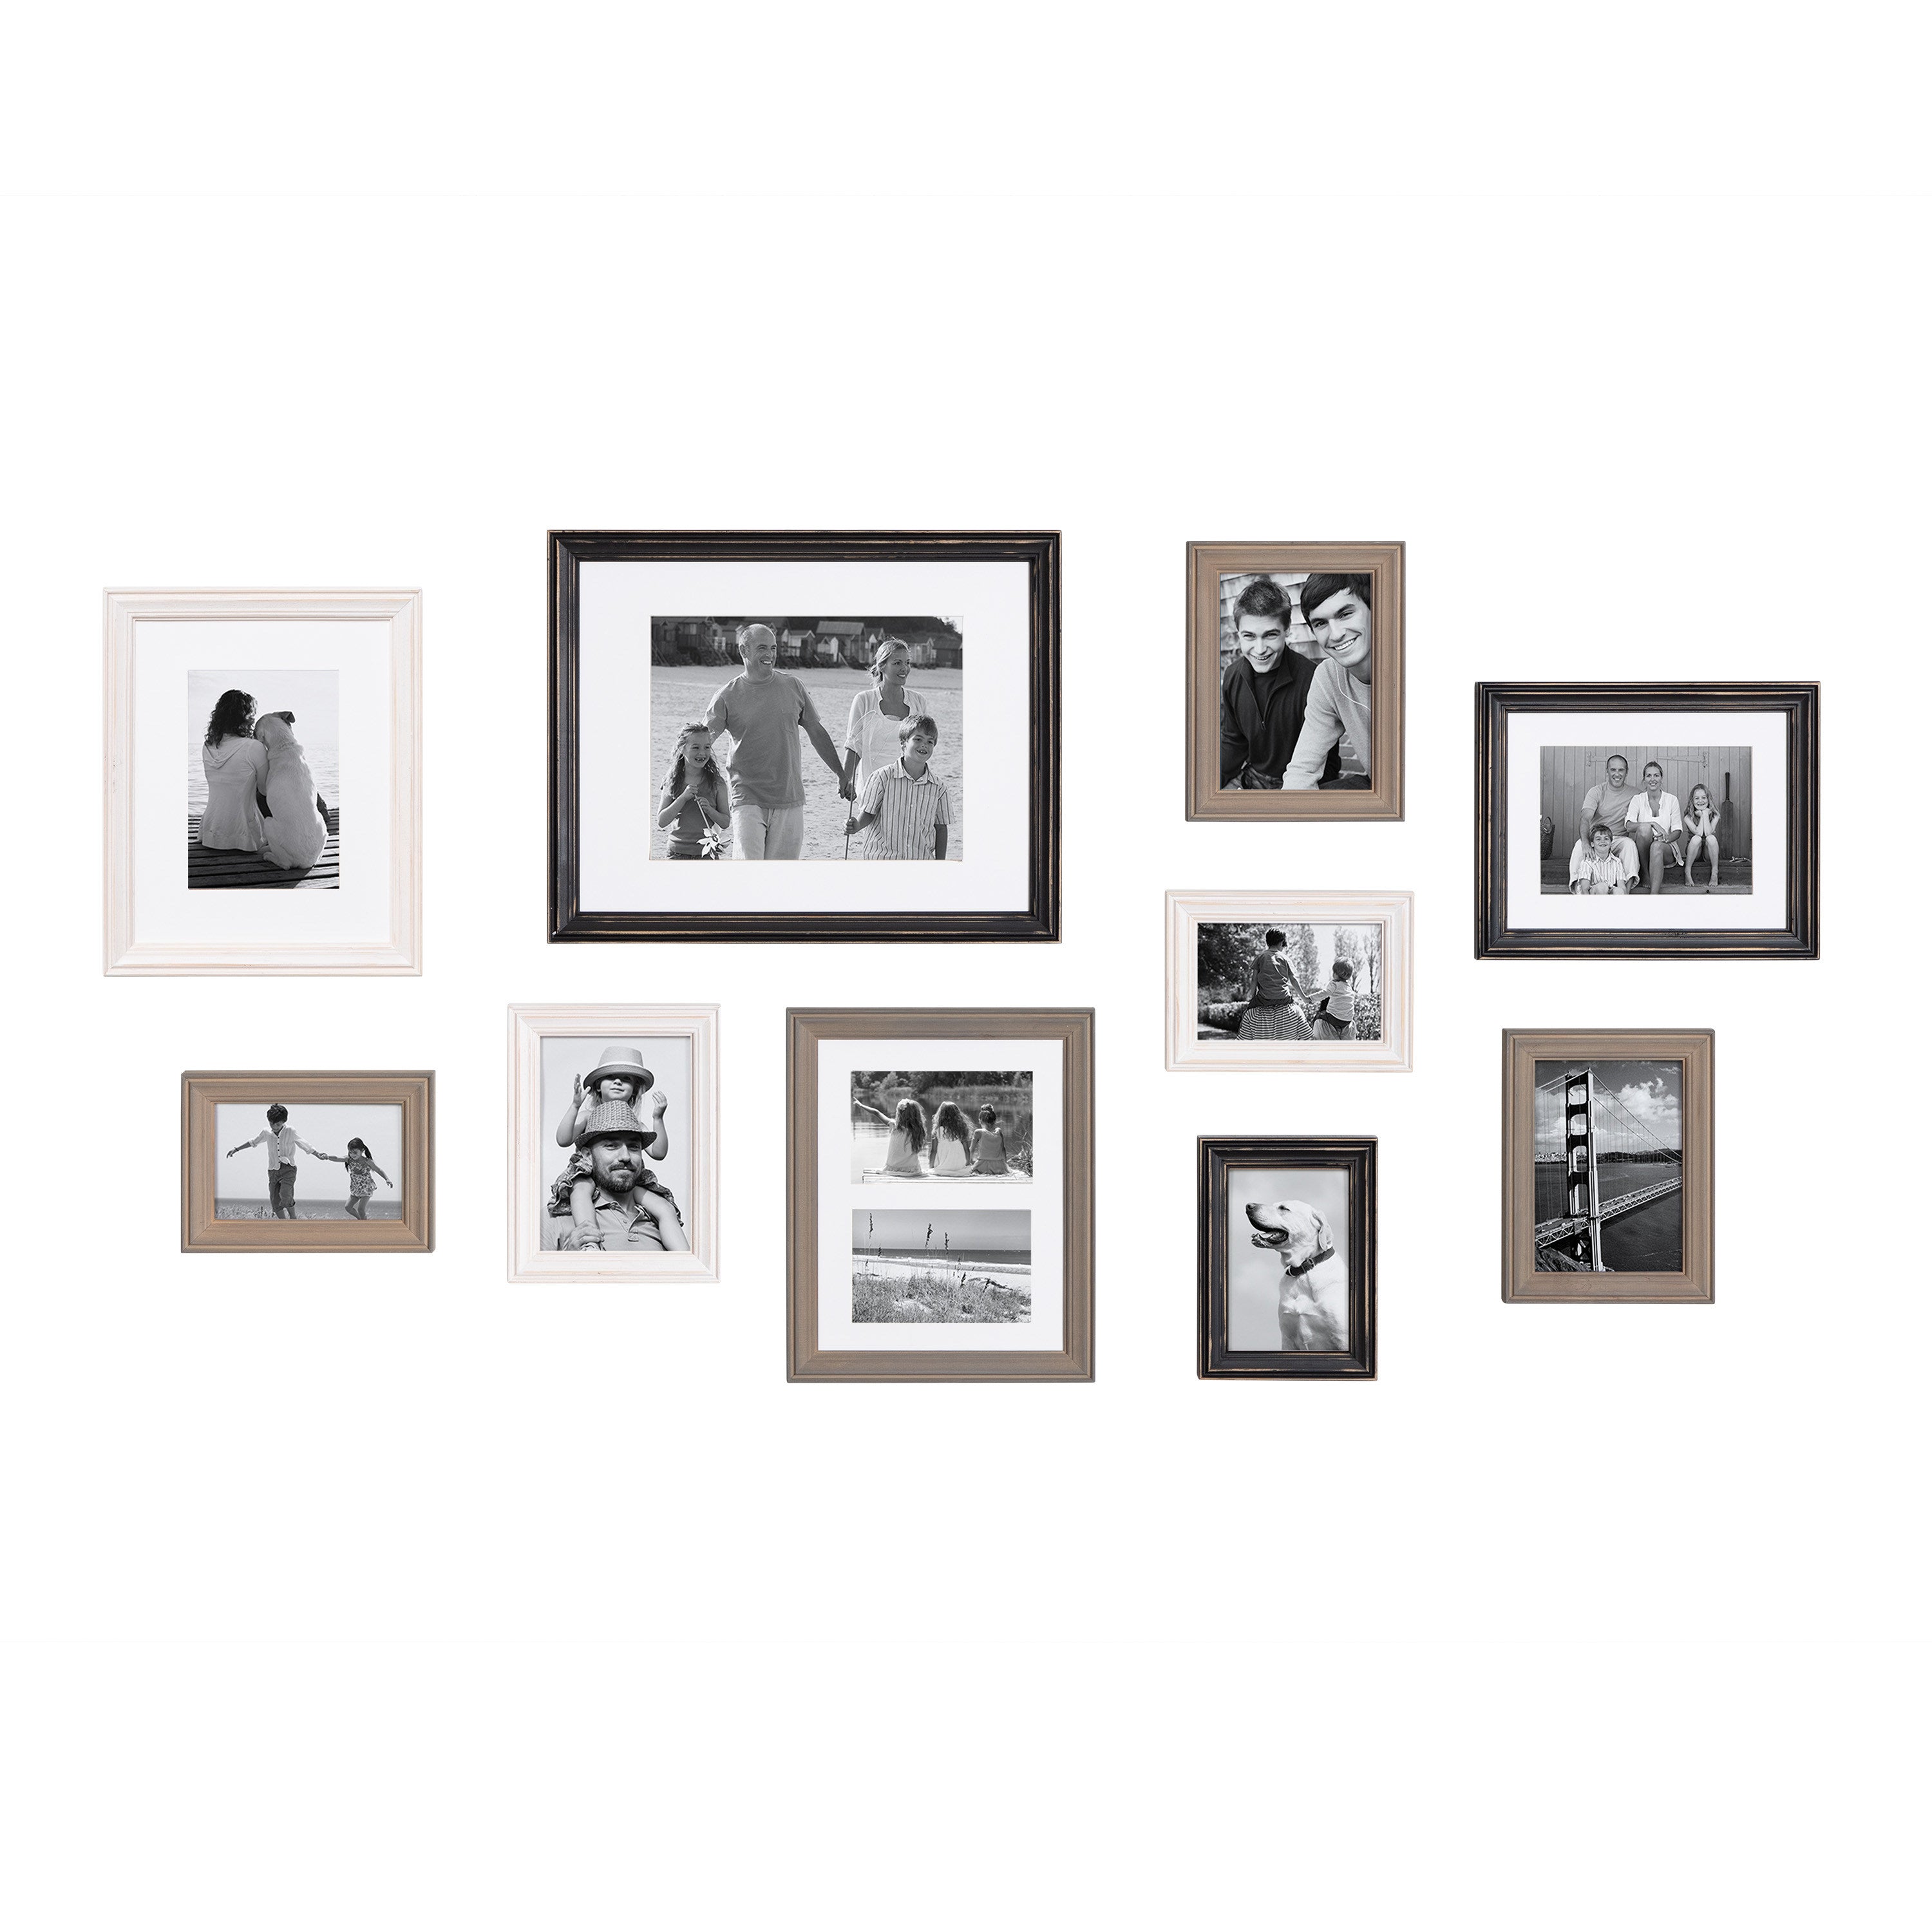 4x6 White Picture Frame Set Pack of 3 4x6 Wood Picture Frames for